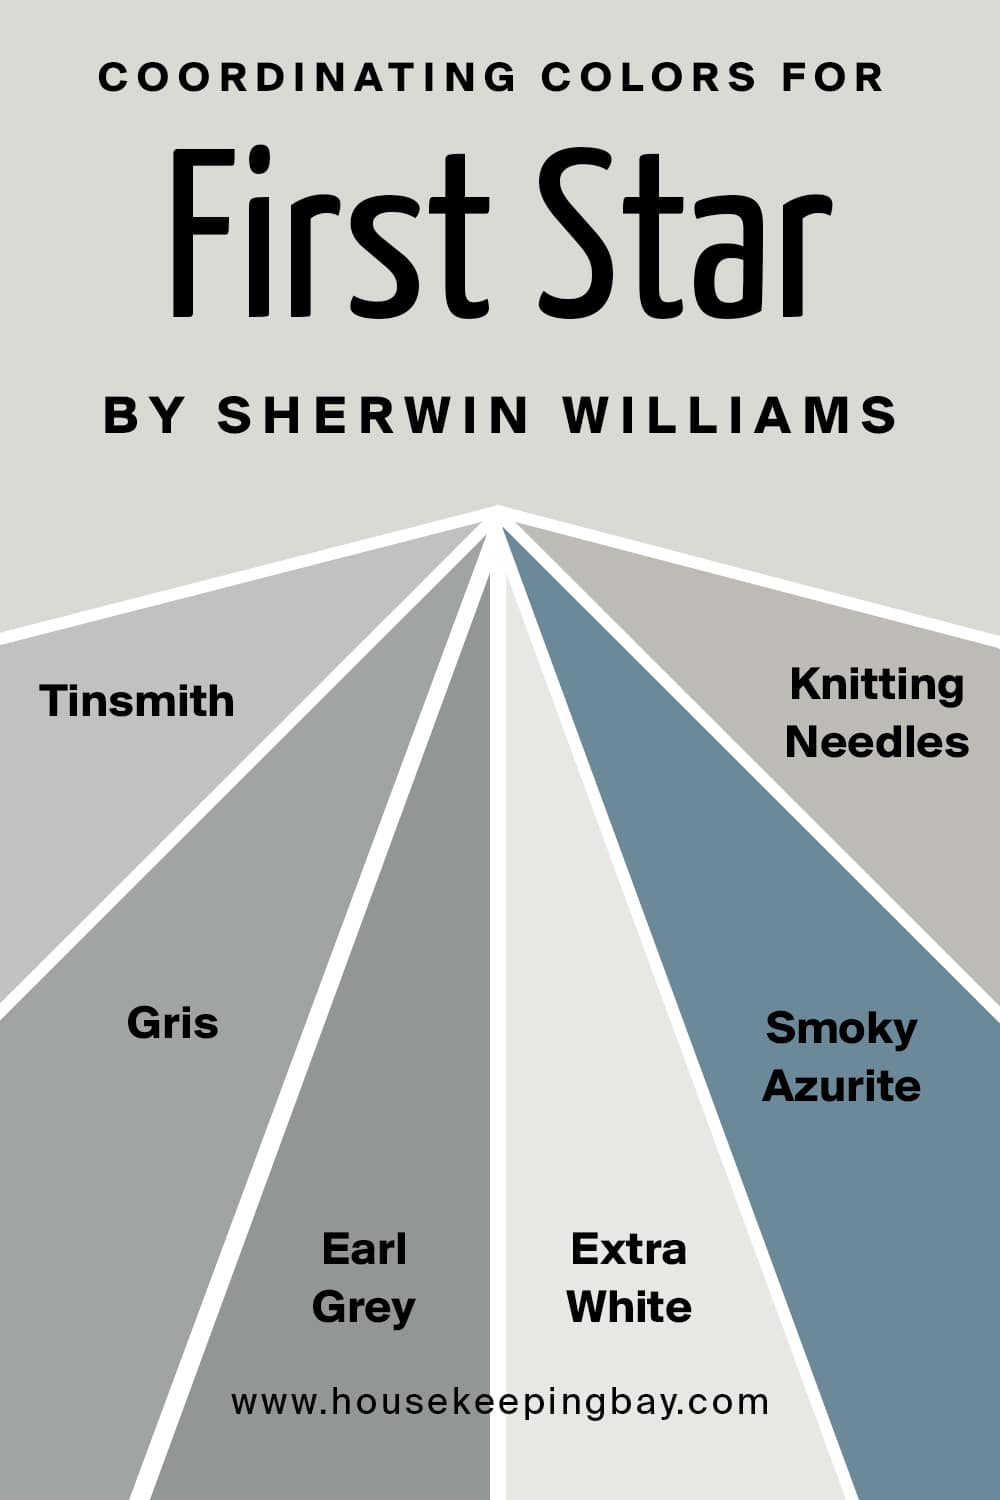 Coordinating Colors for First Star by Sherwin Williams